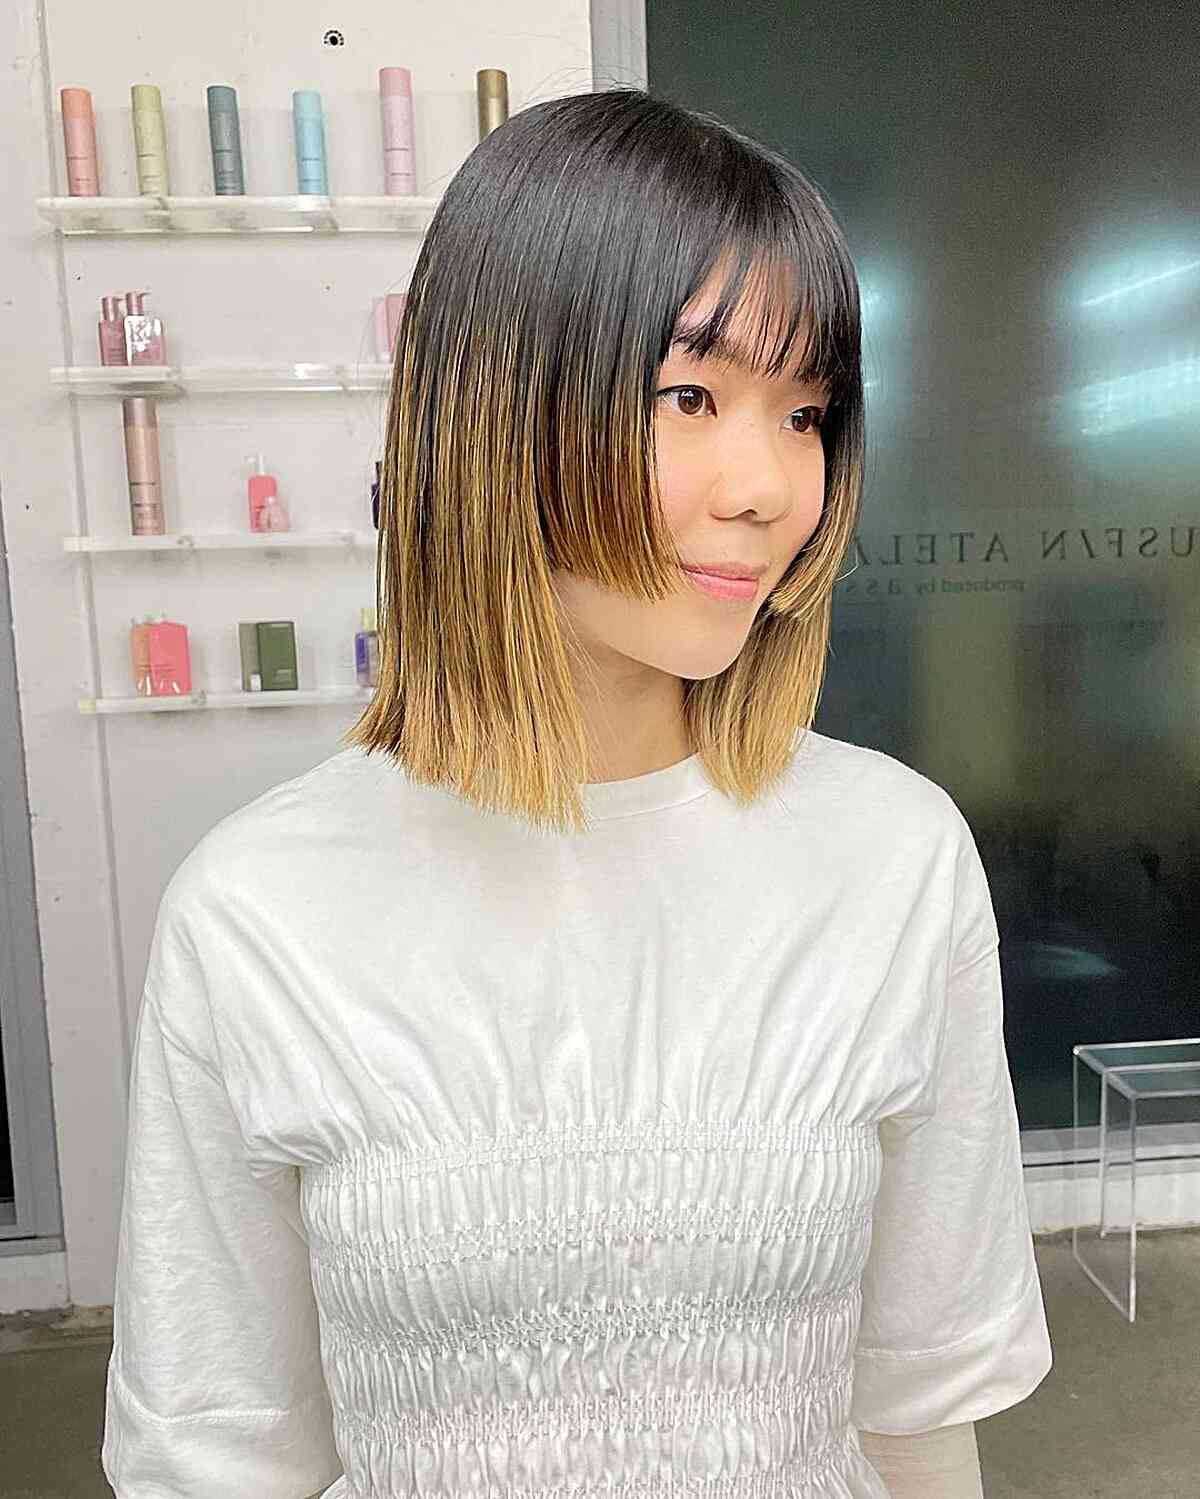 Step Cut for Neck-Length Bob with Bangs Alternative Style